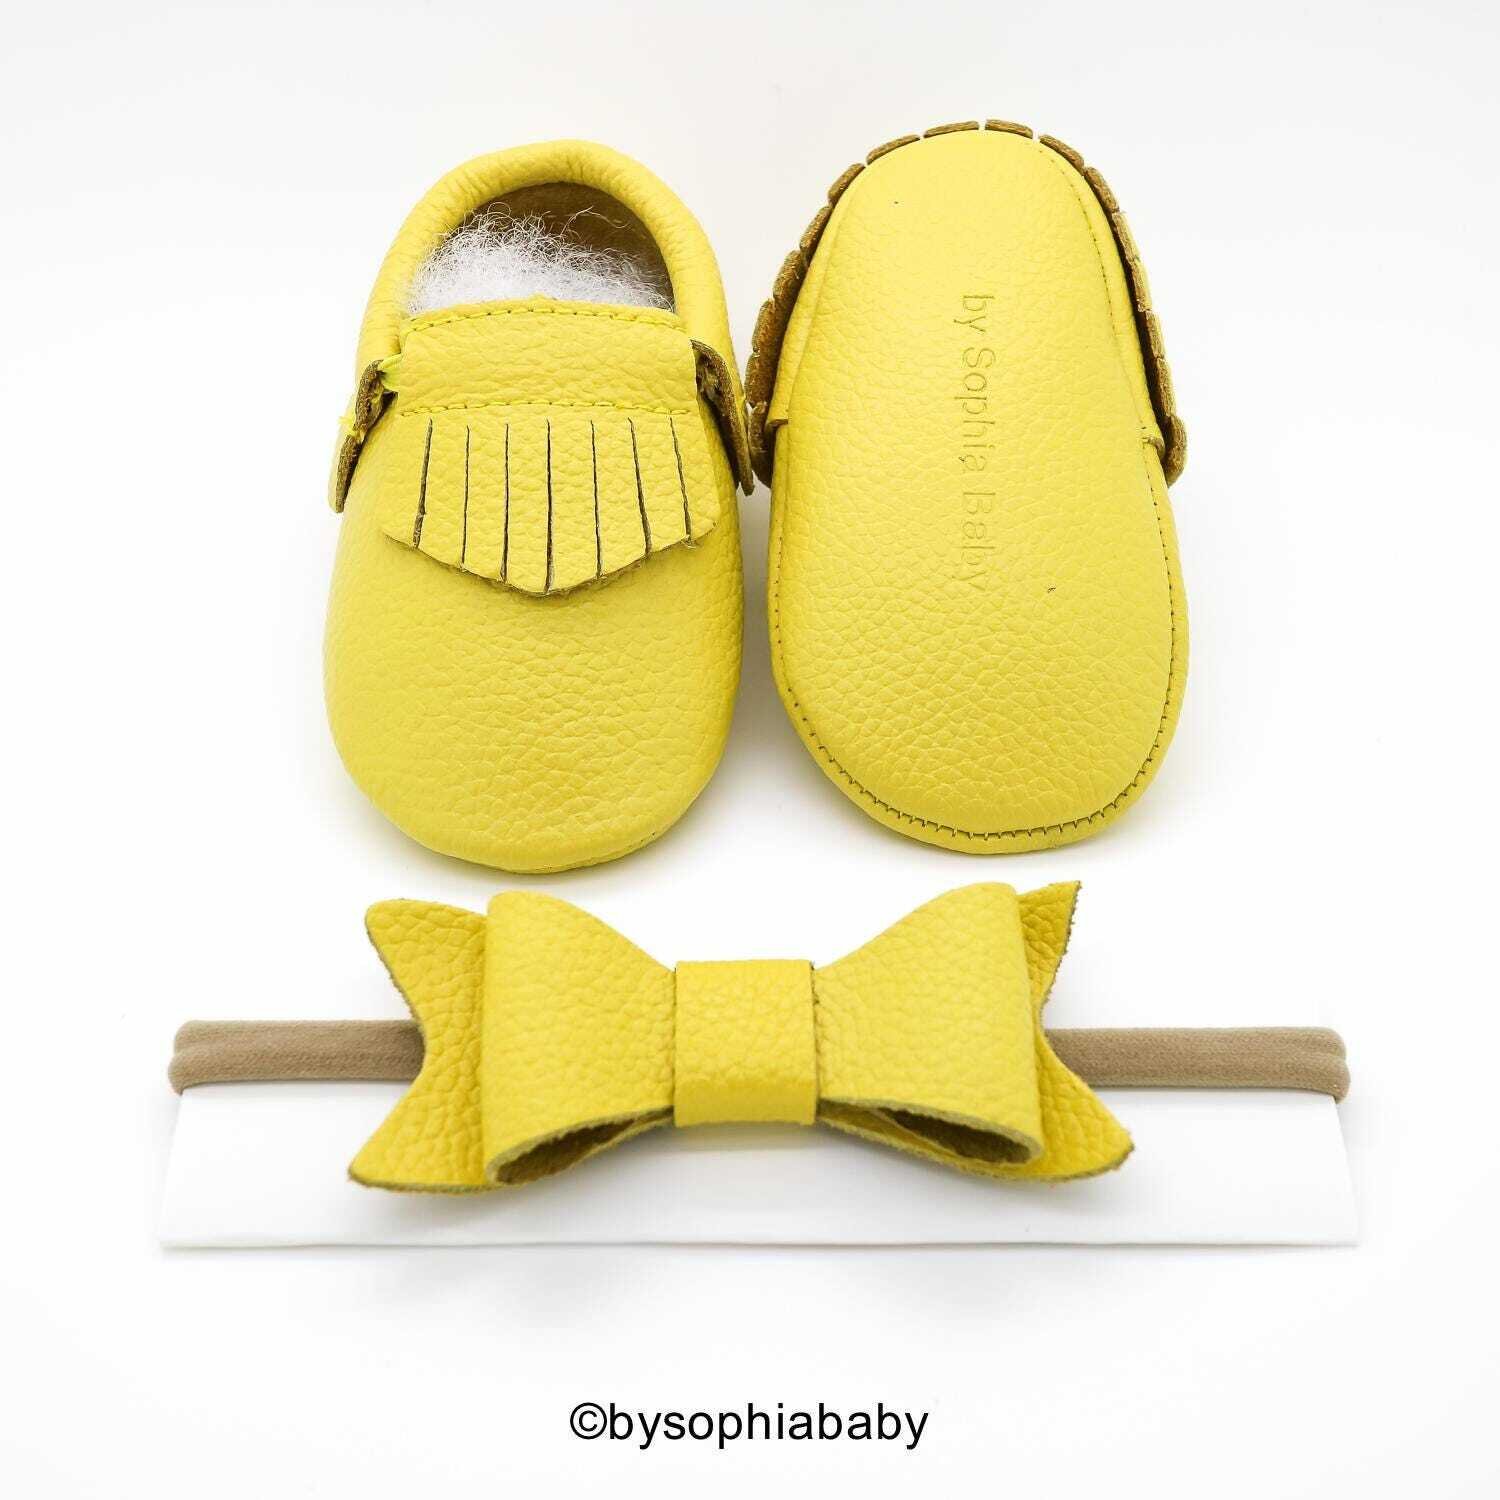 Yellow Fringe Moccasins Baby Yellow Moccasins Baby Leather Shoes Genuine Leather Moccs Toddler Moccasins Baby Moccs Baby Shower Gift